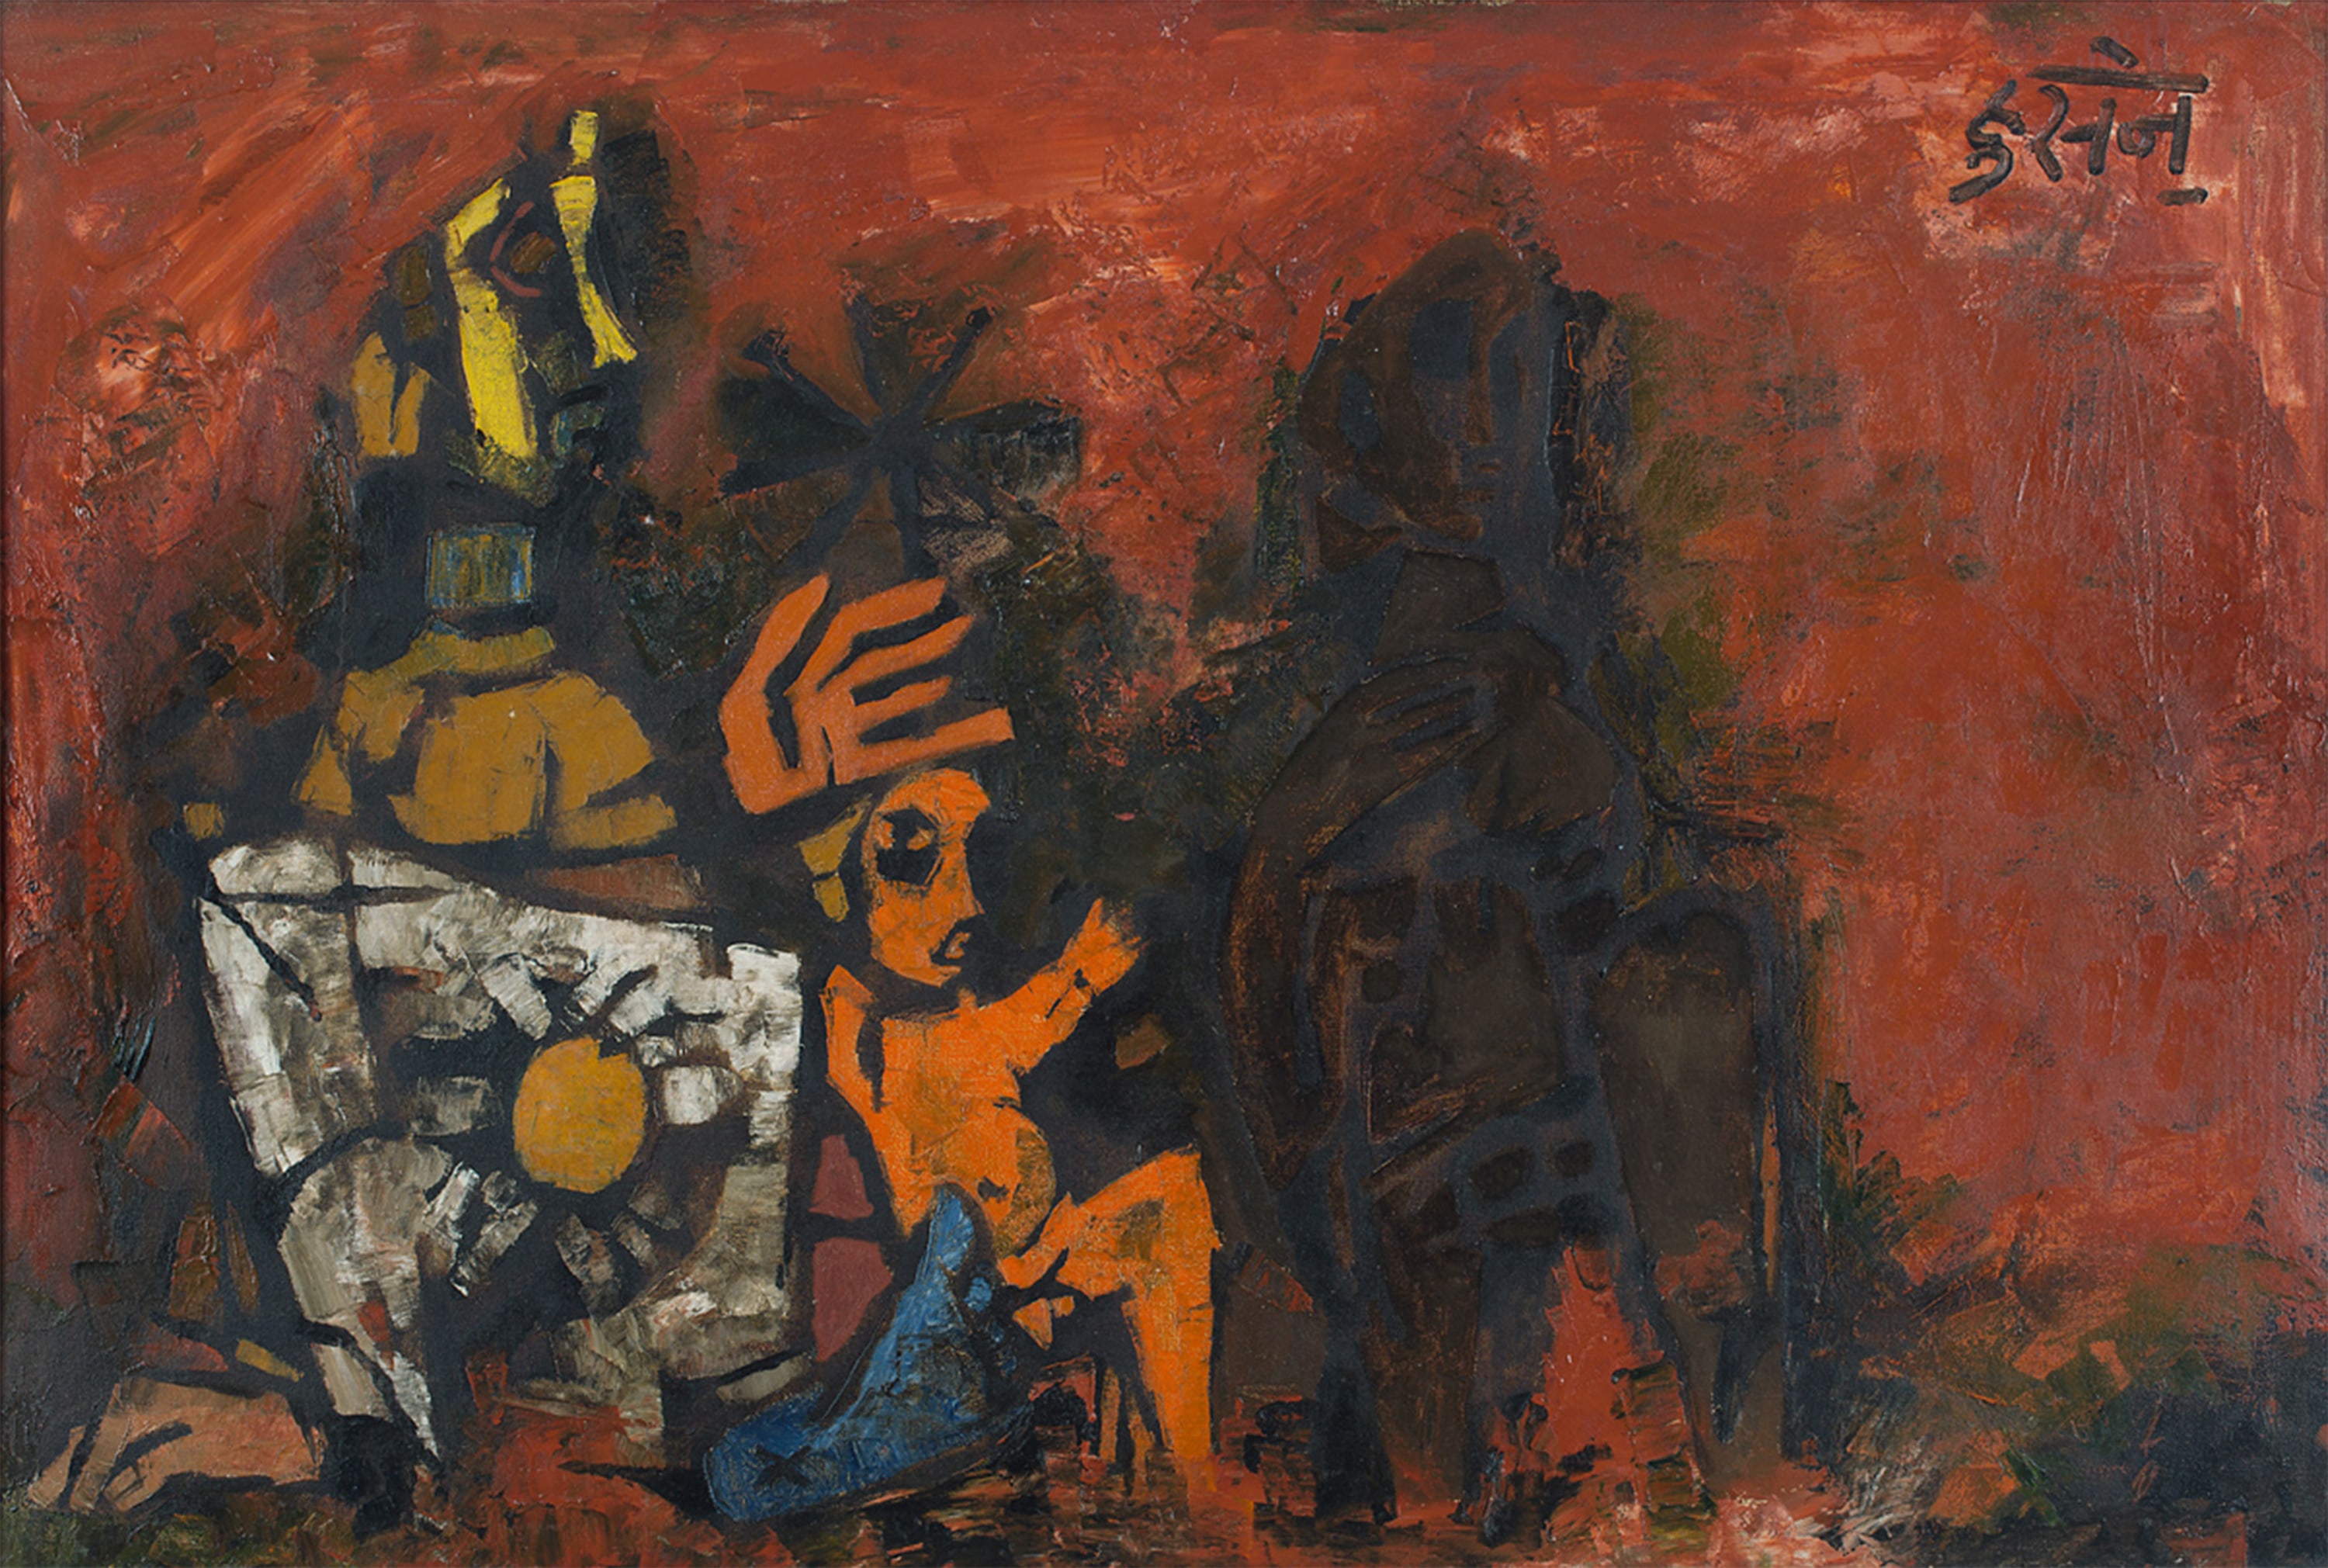 A painting by M.F. Husain (Source - DAG)